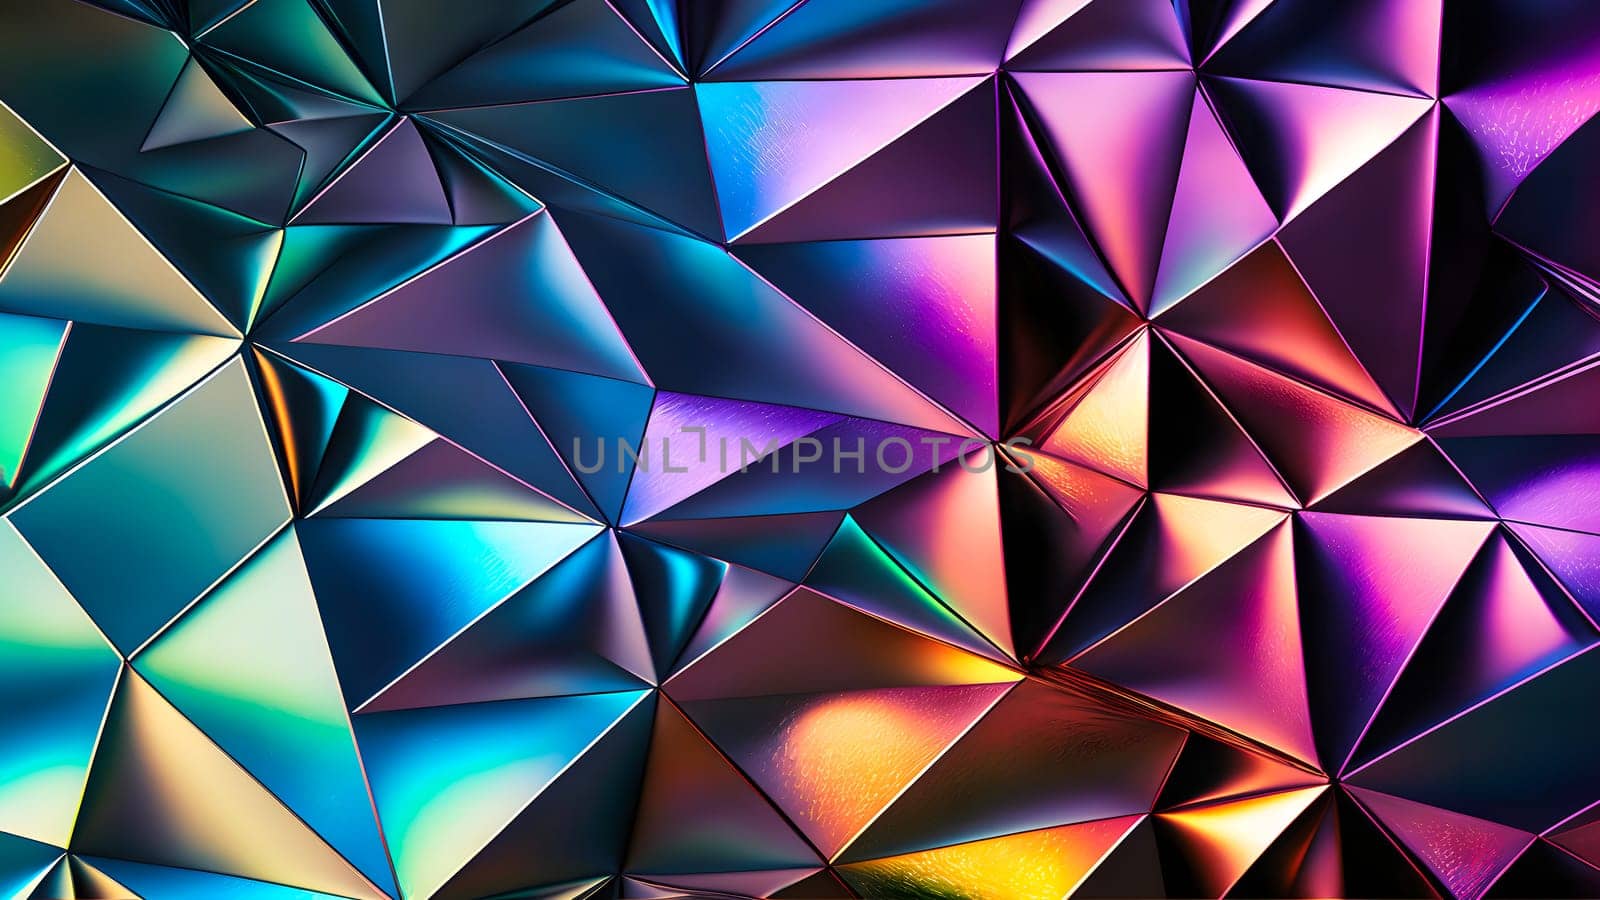 texture and abstract full-frame background of iridescent metal, neural network generated art by z1b